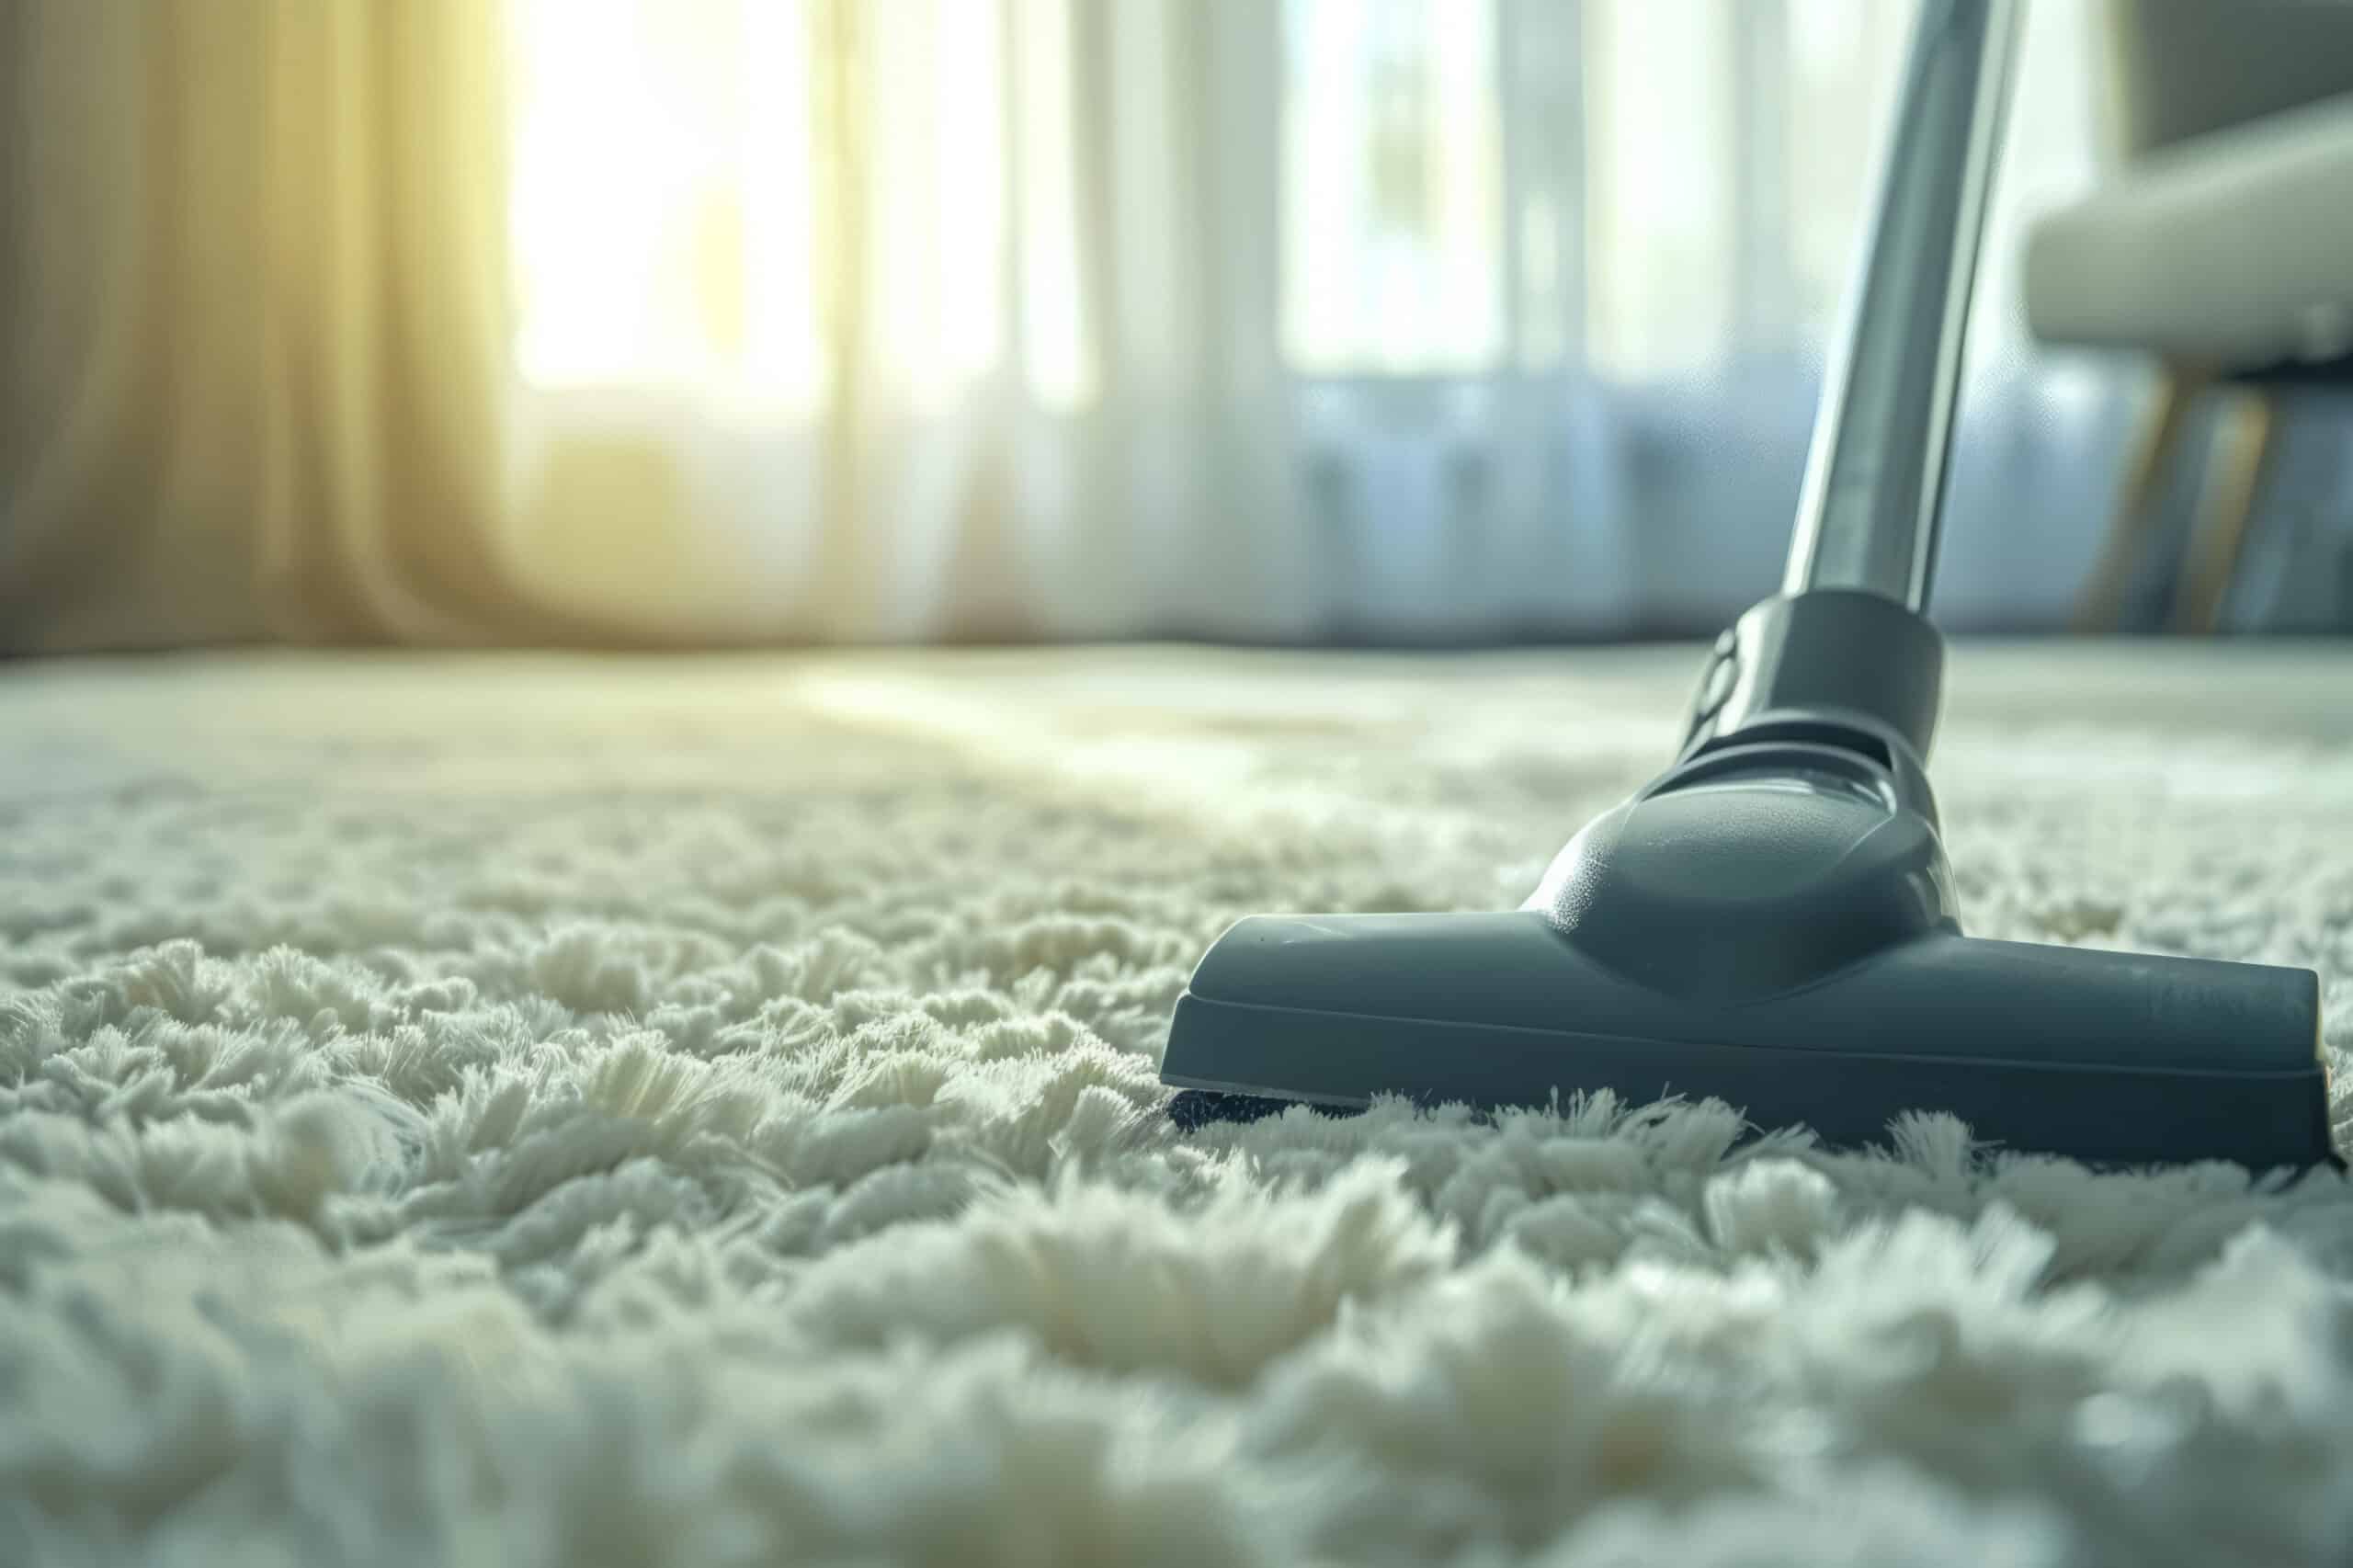 www.appr.com : How To Use A Carpet Cleaner Vacuum?